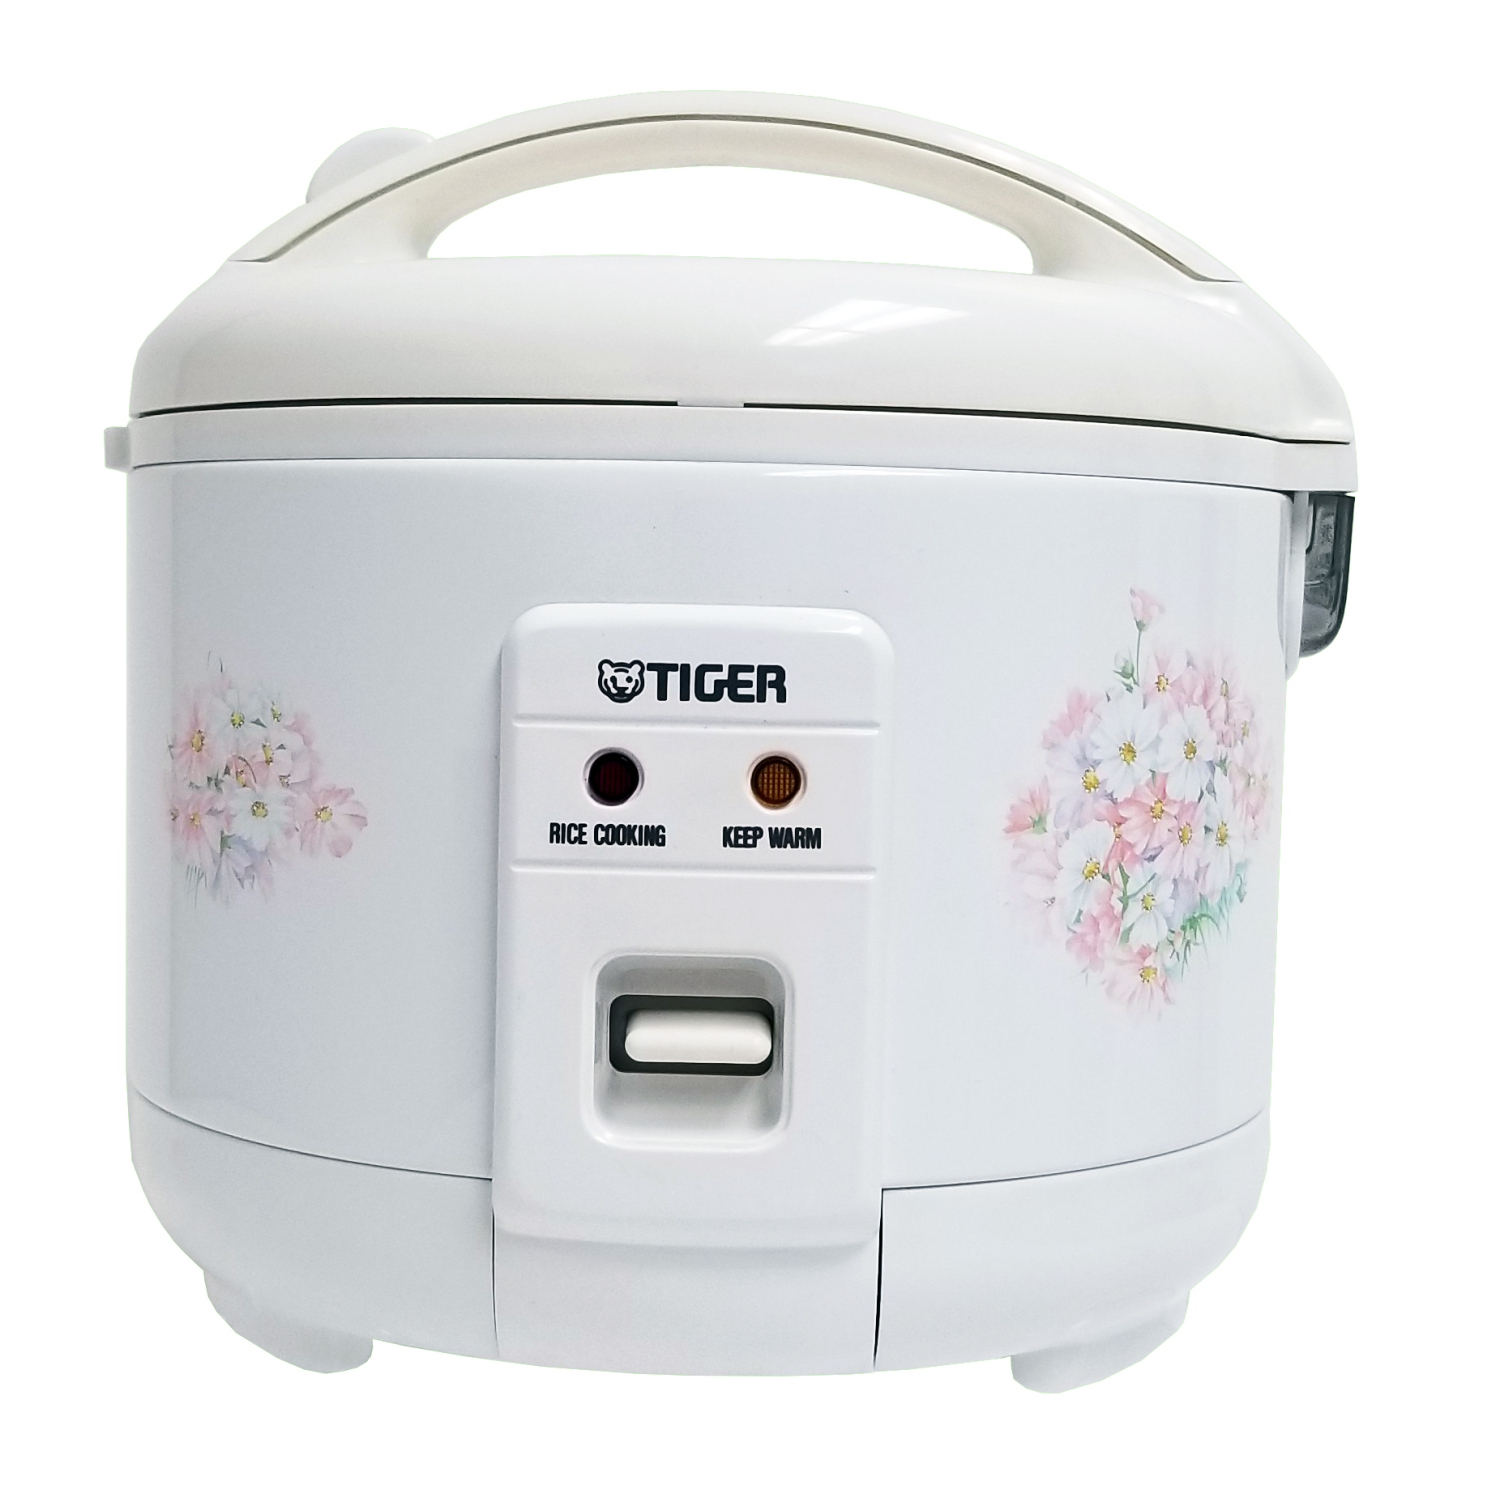 Tiger JNP-0550 Conventional Rice Cooker, 3 Cups - Made in Japan